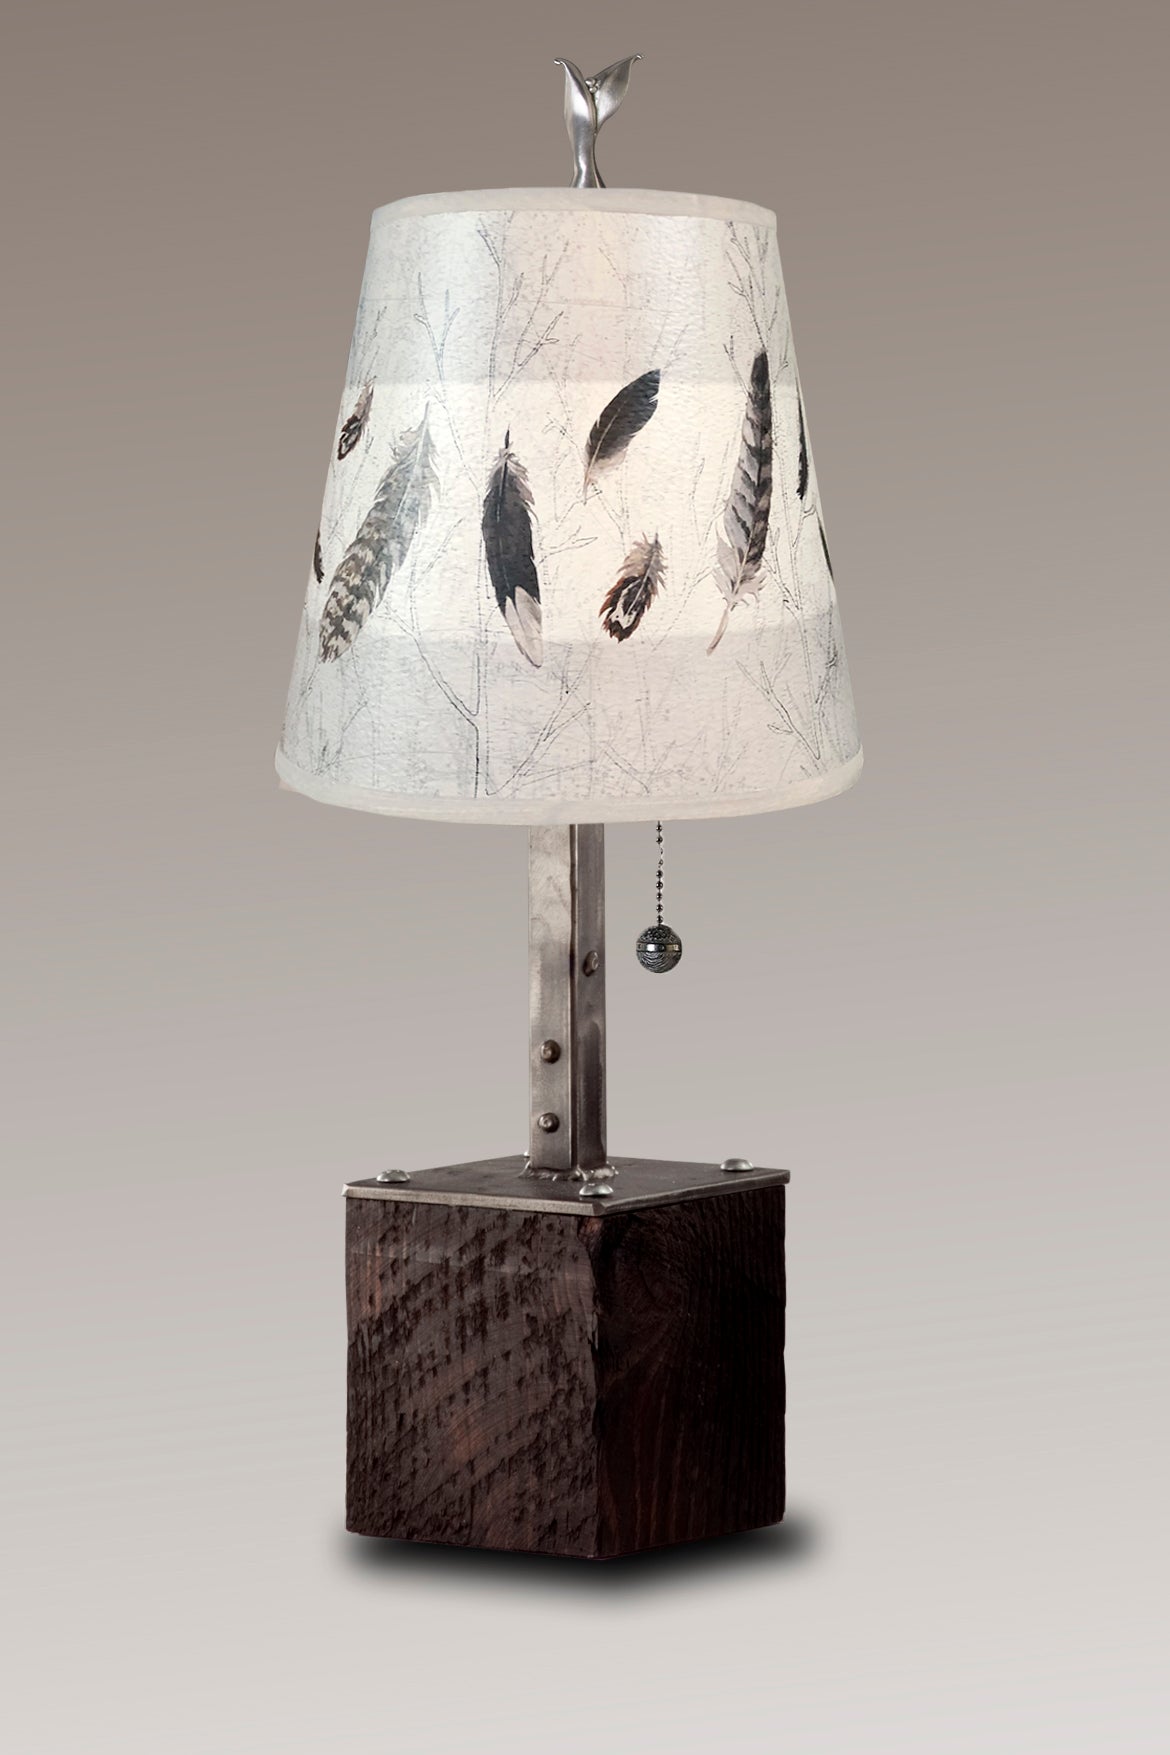 Janna Ugone &amp; Co Table Lamps Steel Table Lamp on Reclaimed Wood with Small Drum Shade in Feathers in Pebble